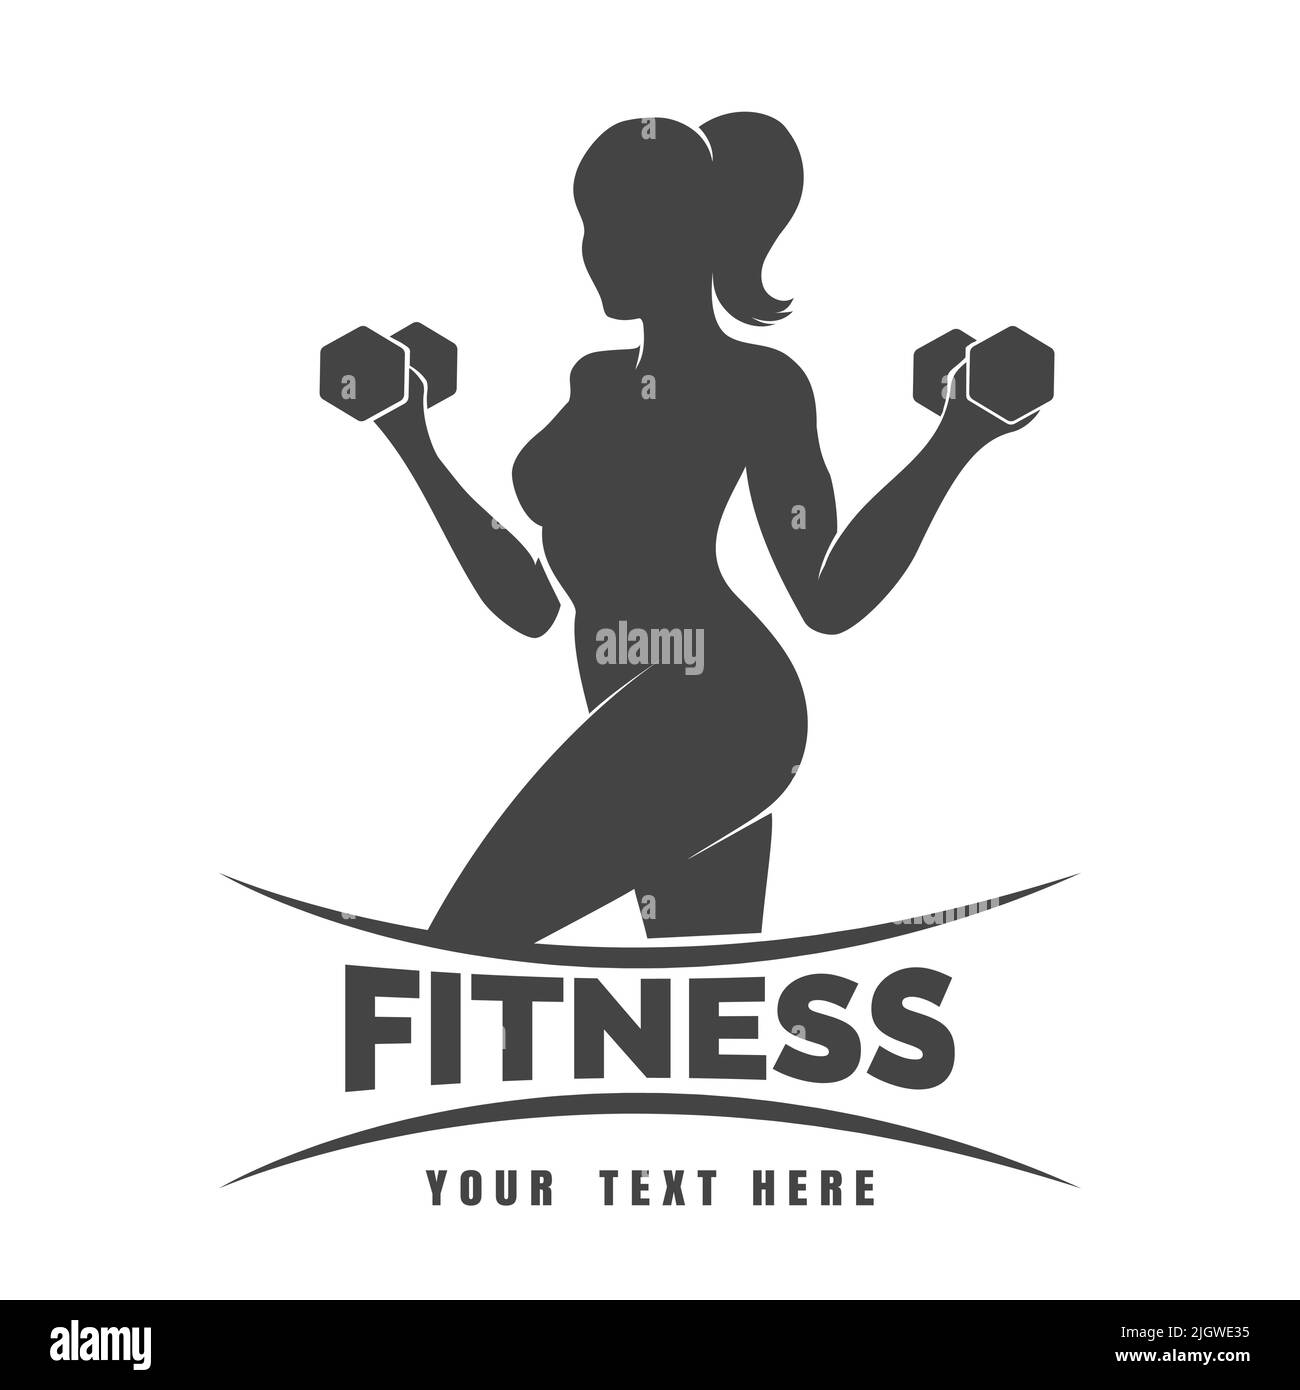 Fitness club logo or emblem with woman holds dumbbells. Isolated on white background. Stock Vector